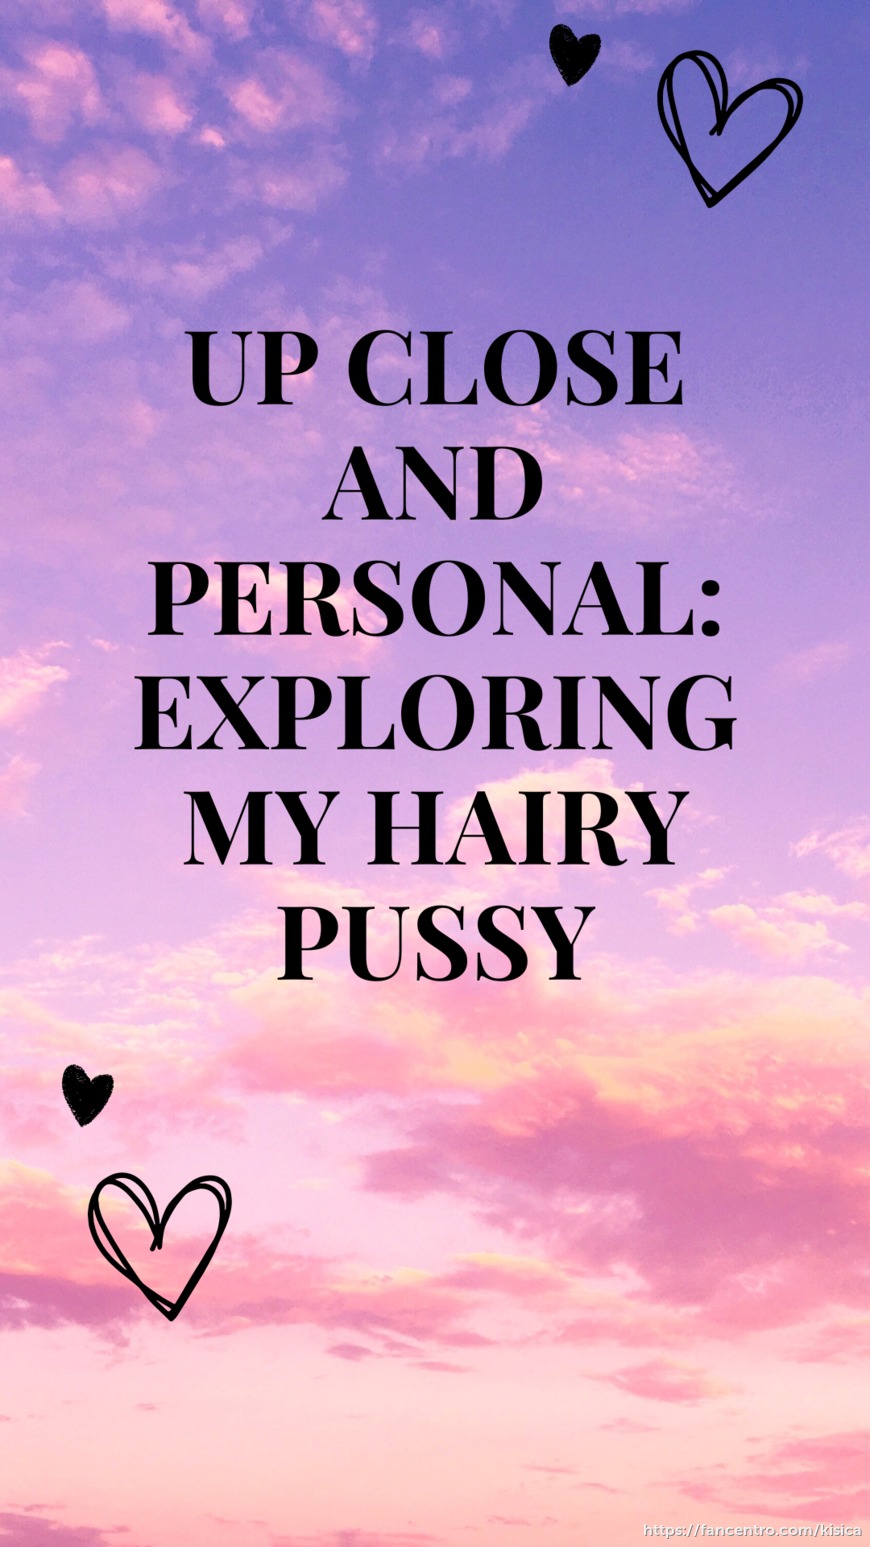 Up Close and Personal: Exploring My Hairy Pussy